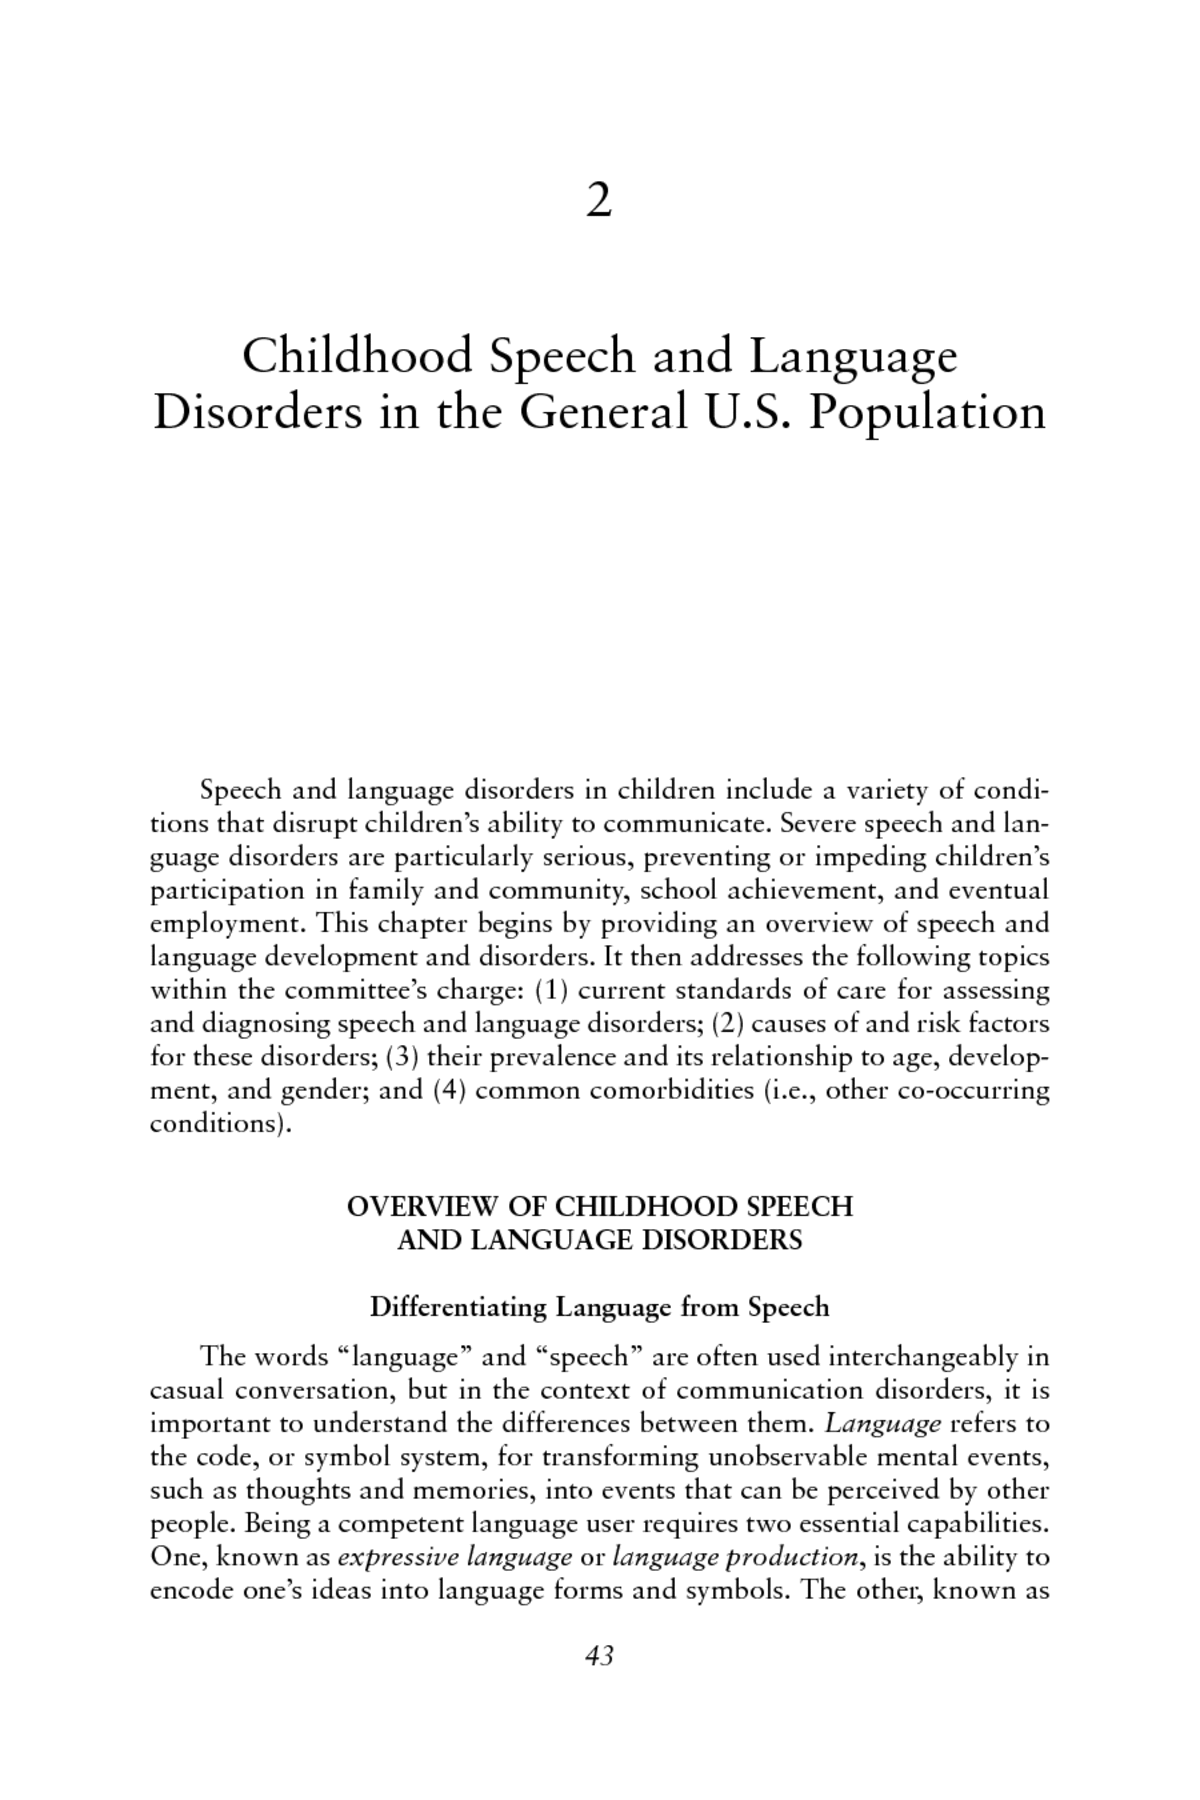 Frontiers  The Emergence of Inner Speech and Its Measurement in Atypically  Developing Children